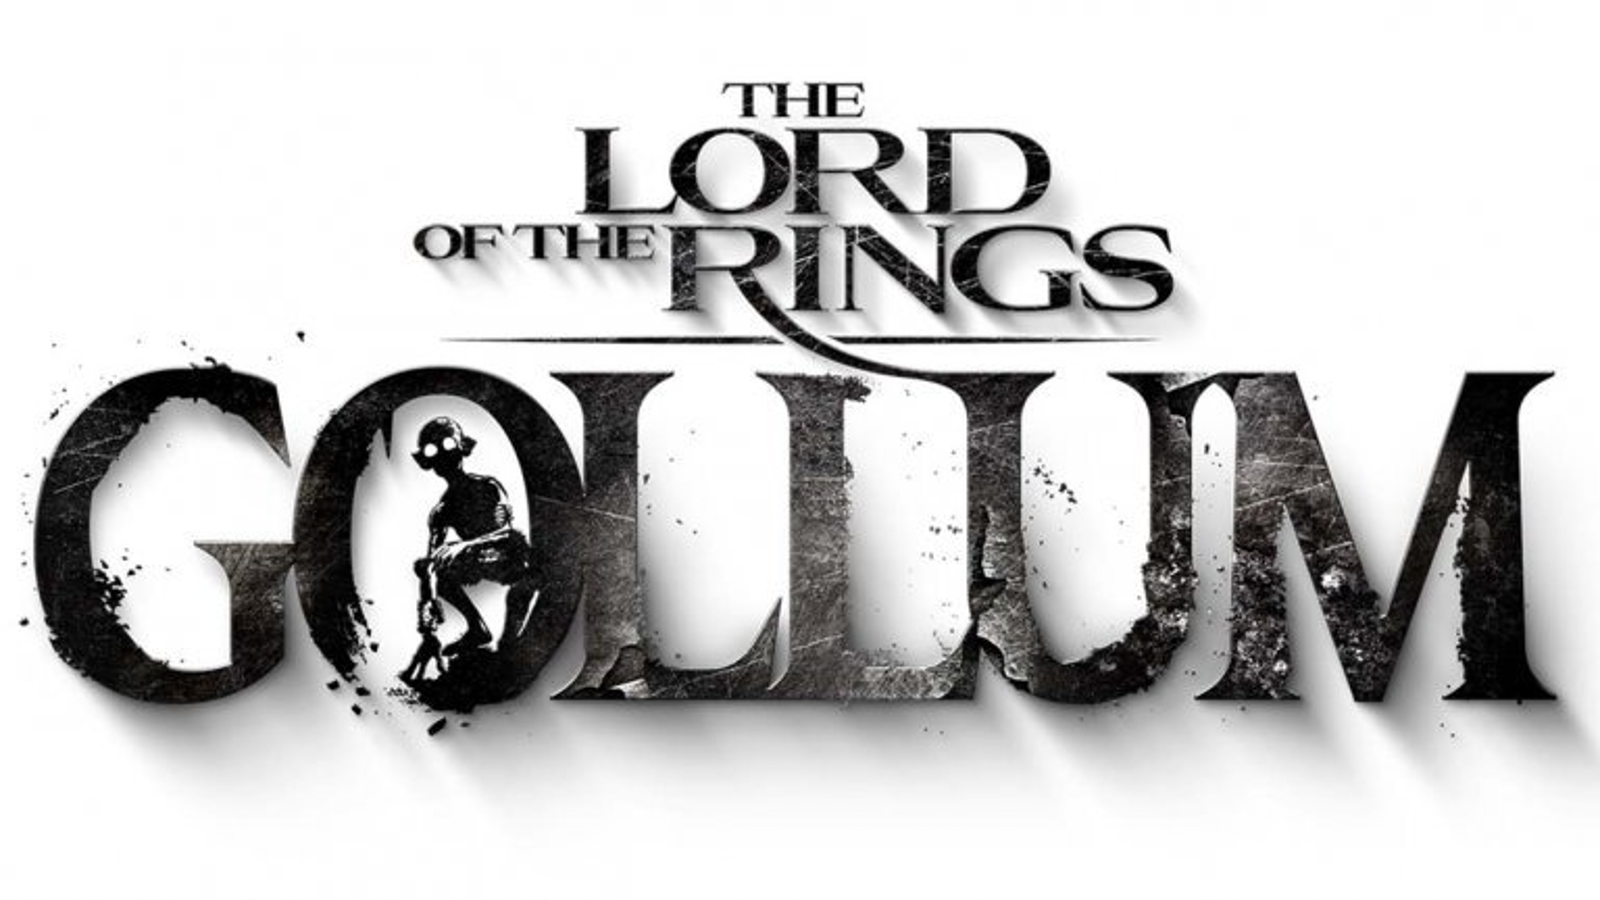 The Lord of the Rings: Gollum's gameplay is as conflicted as Gollum